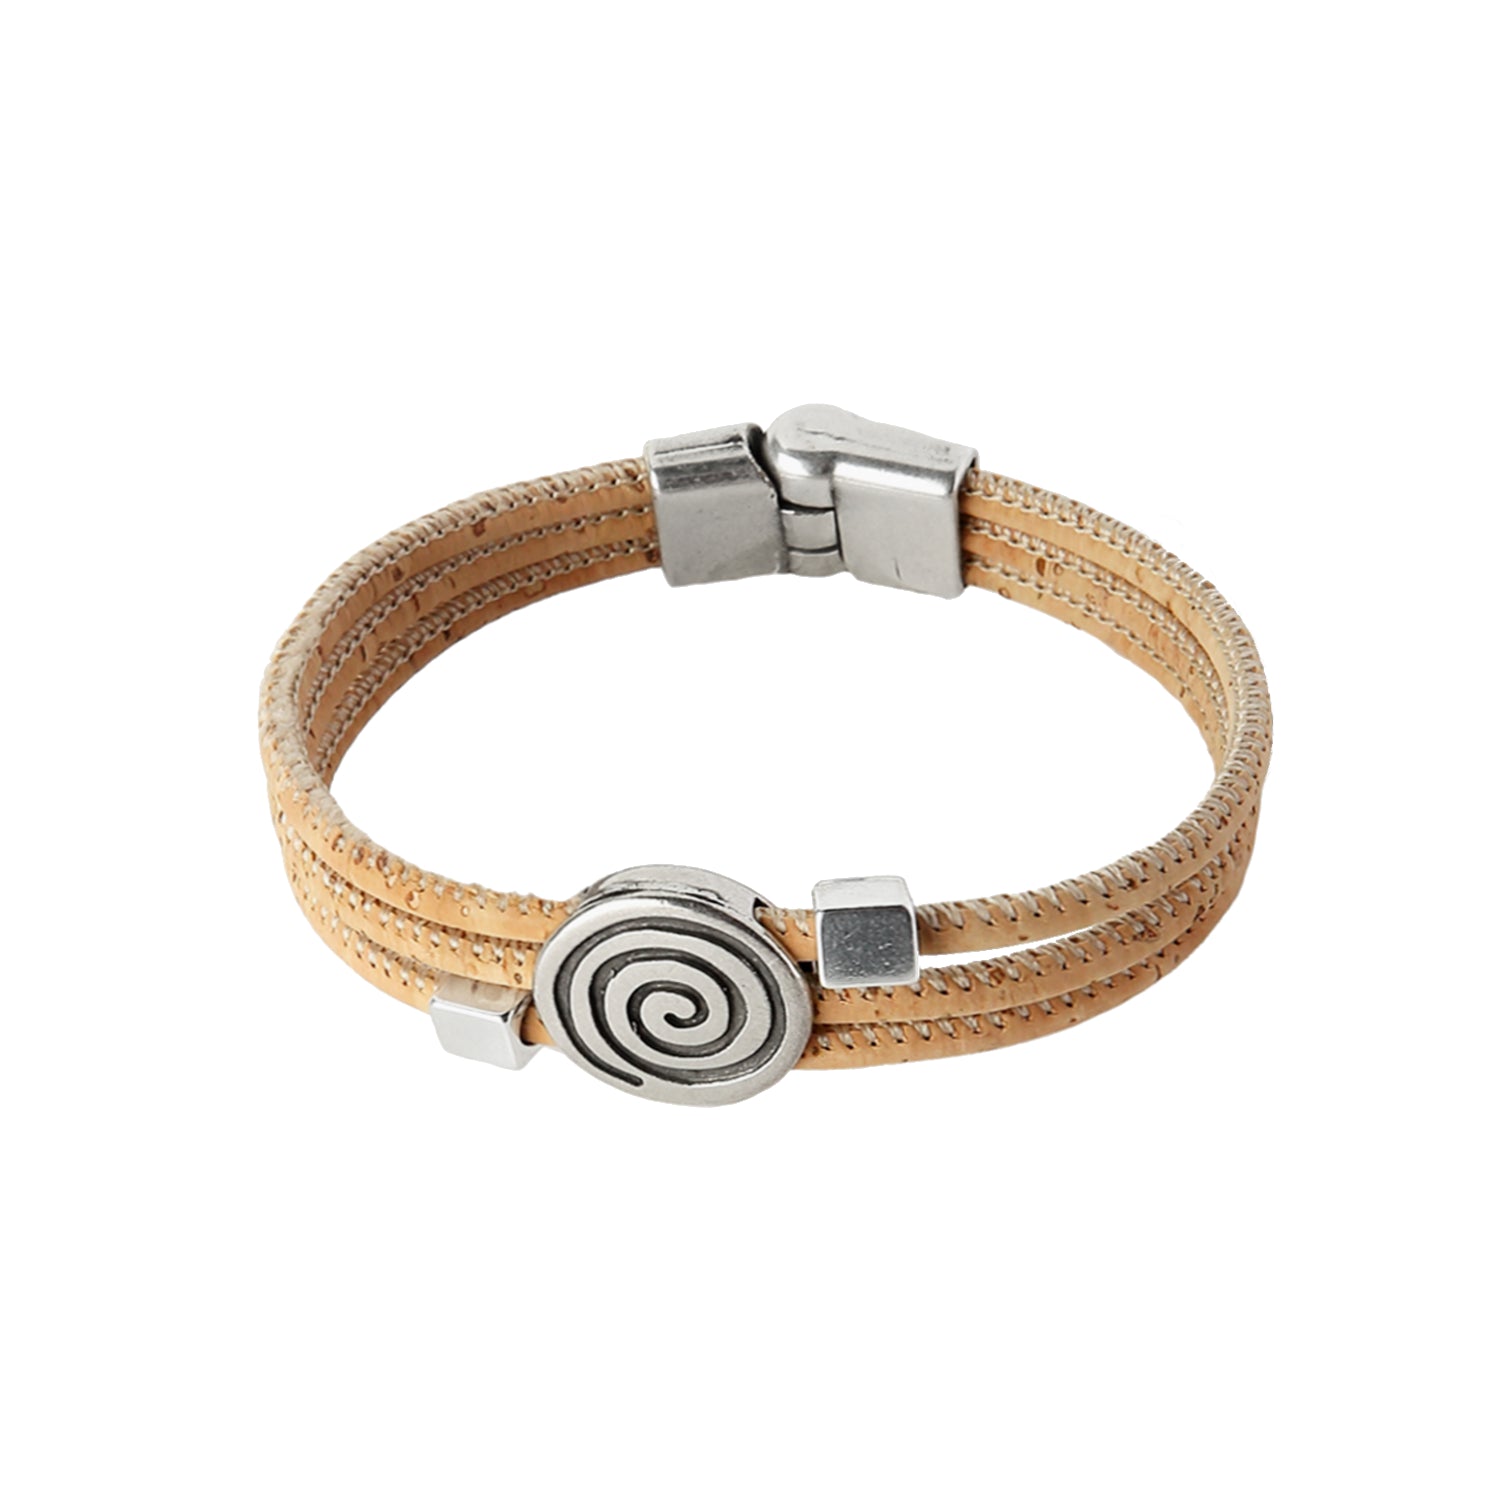 Cork Spiral (bracelet) - Cork and Company | Made in Portugal | Vegan Eco-Friendly Fashion